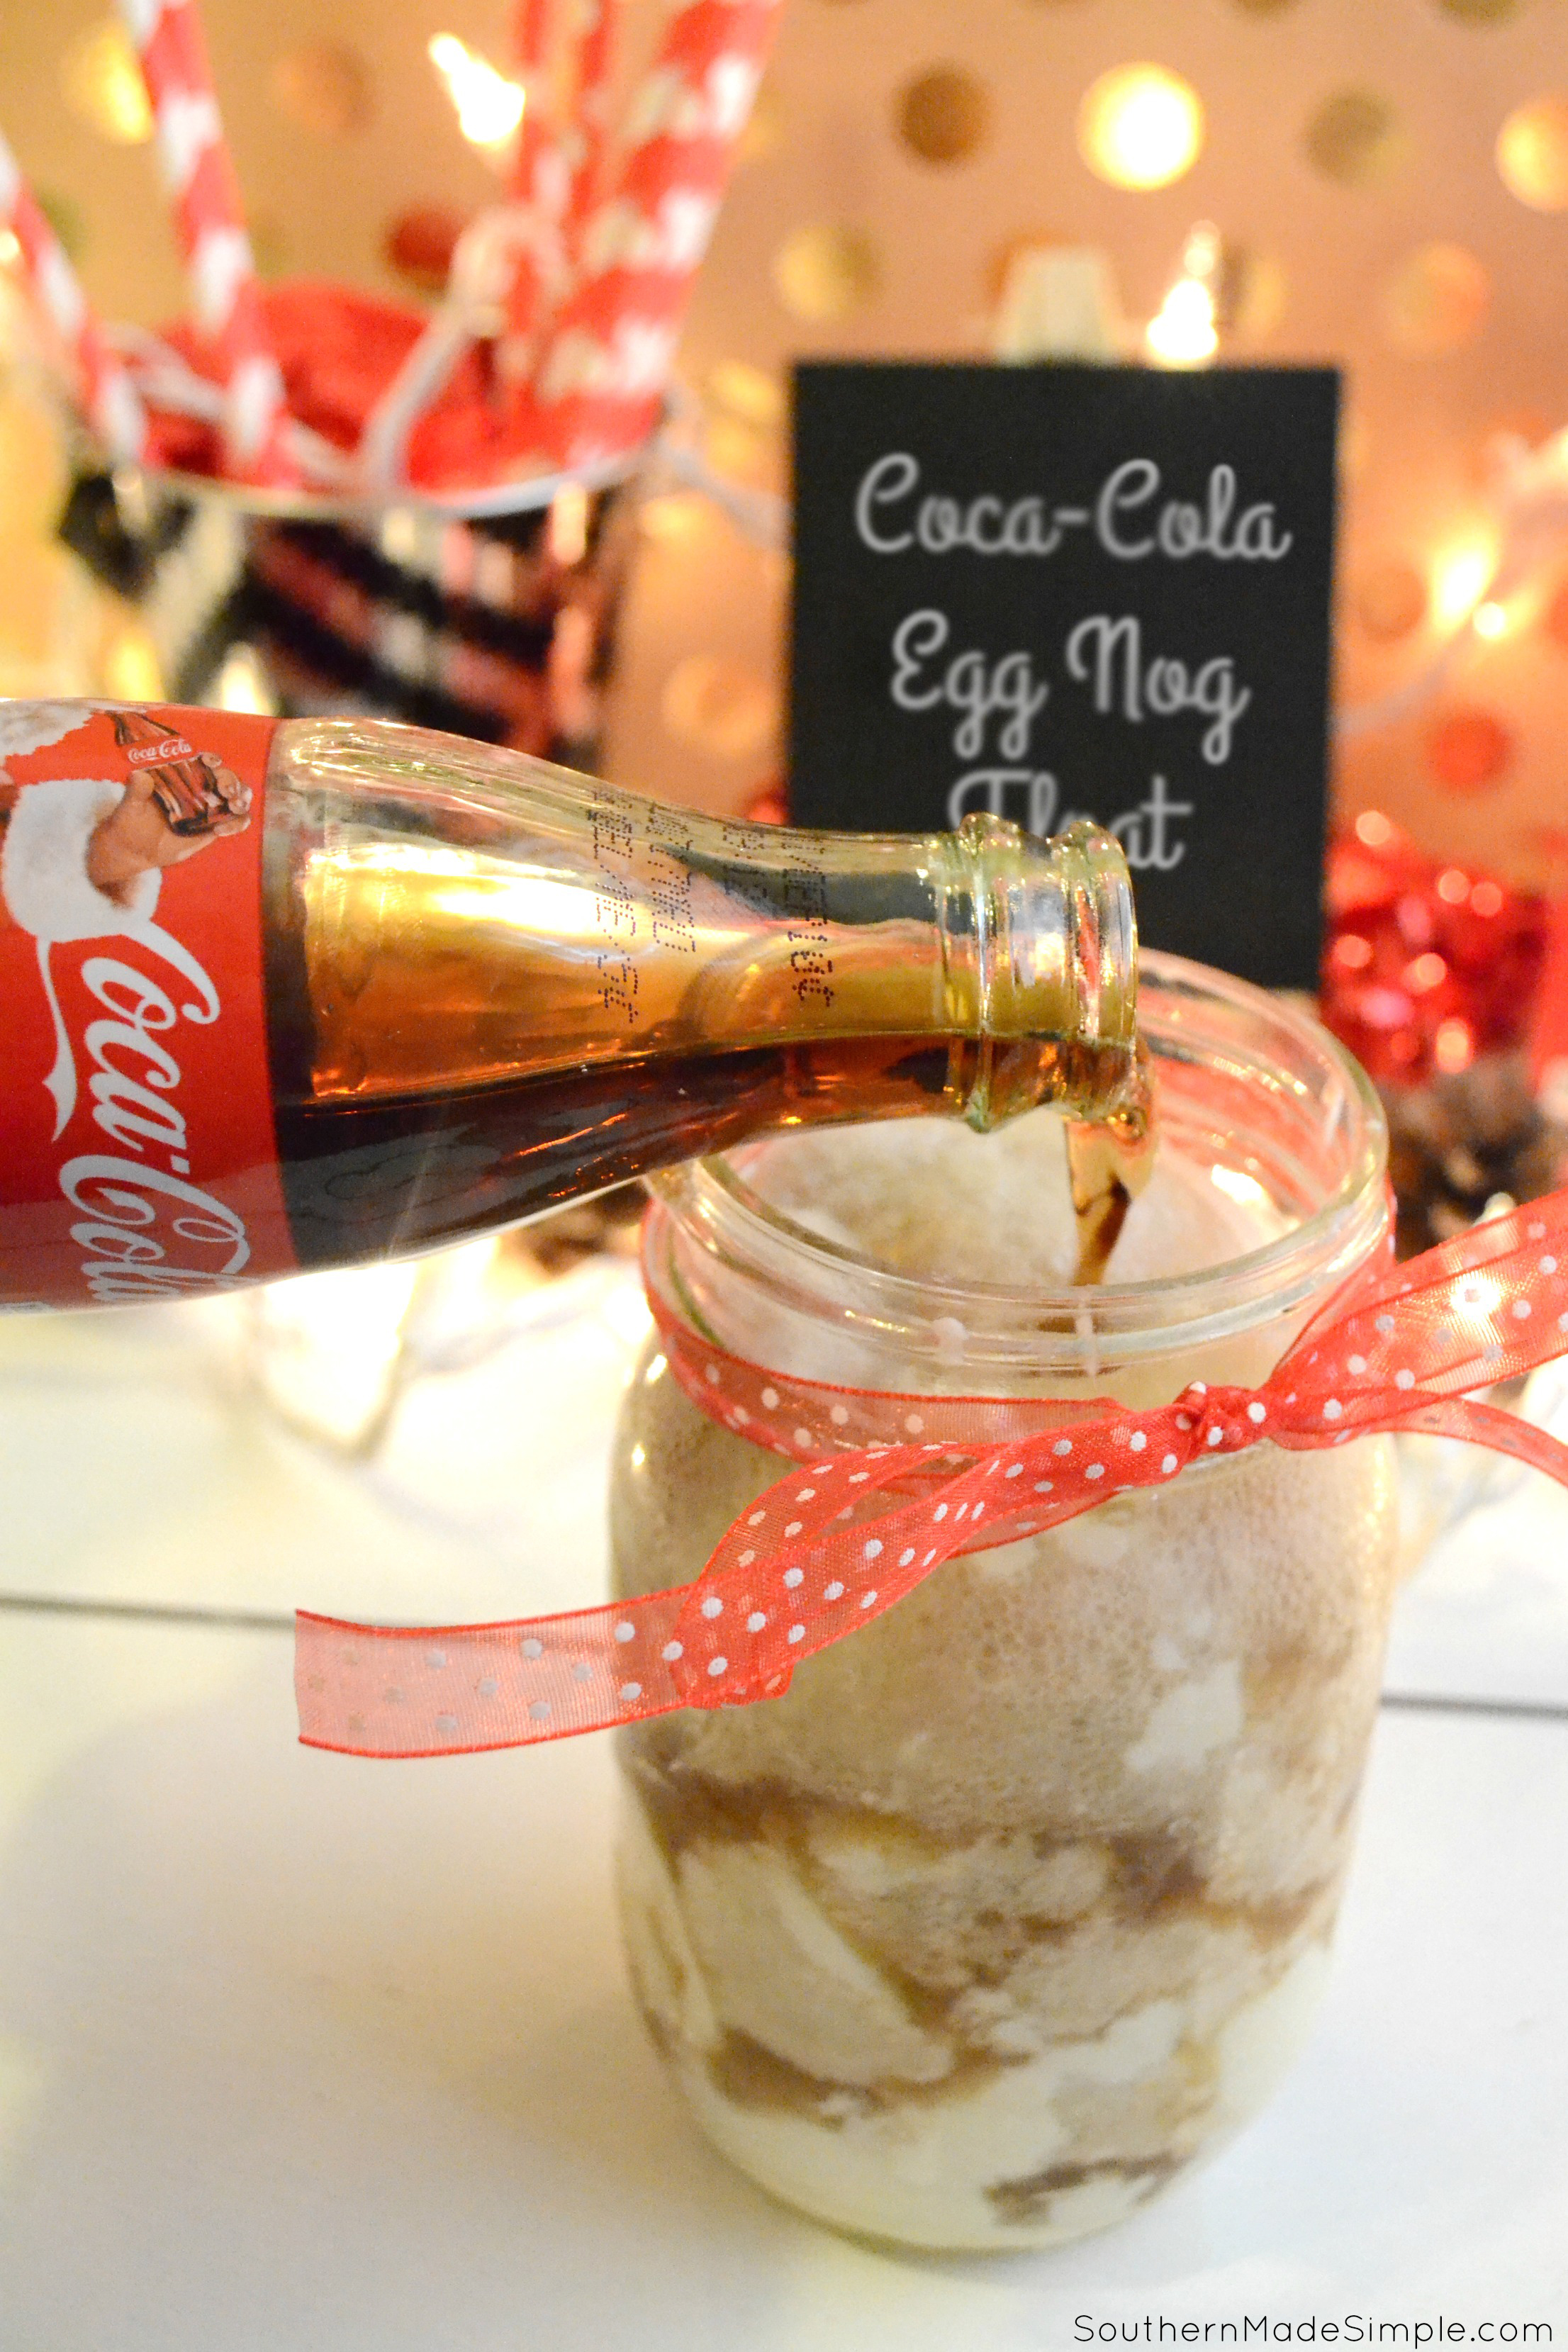 Looking for something extra sweet to satisfy your sweet tooth this holiday season? These Egg Nog Ice Cream Coca-Cola Floats are a fun twist on an old classic, and it's delish!#SmartWayToShareJoy #ad